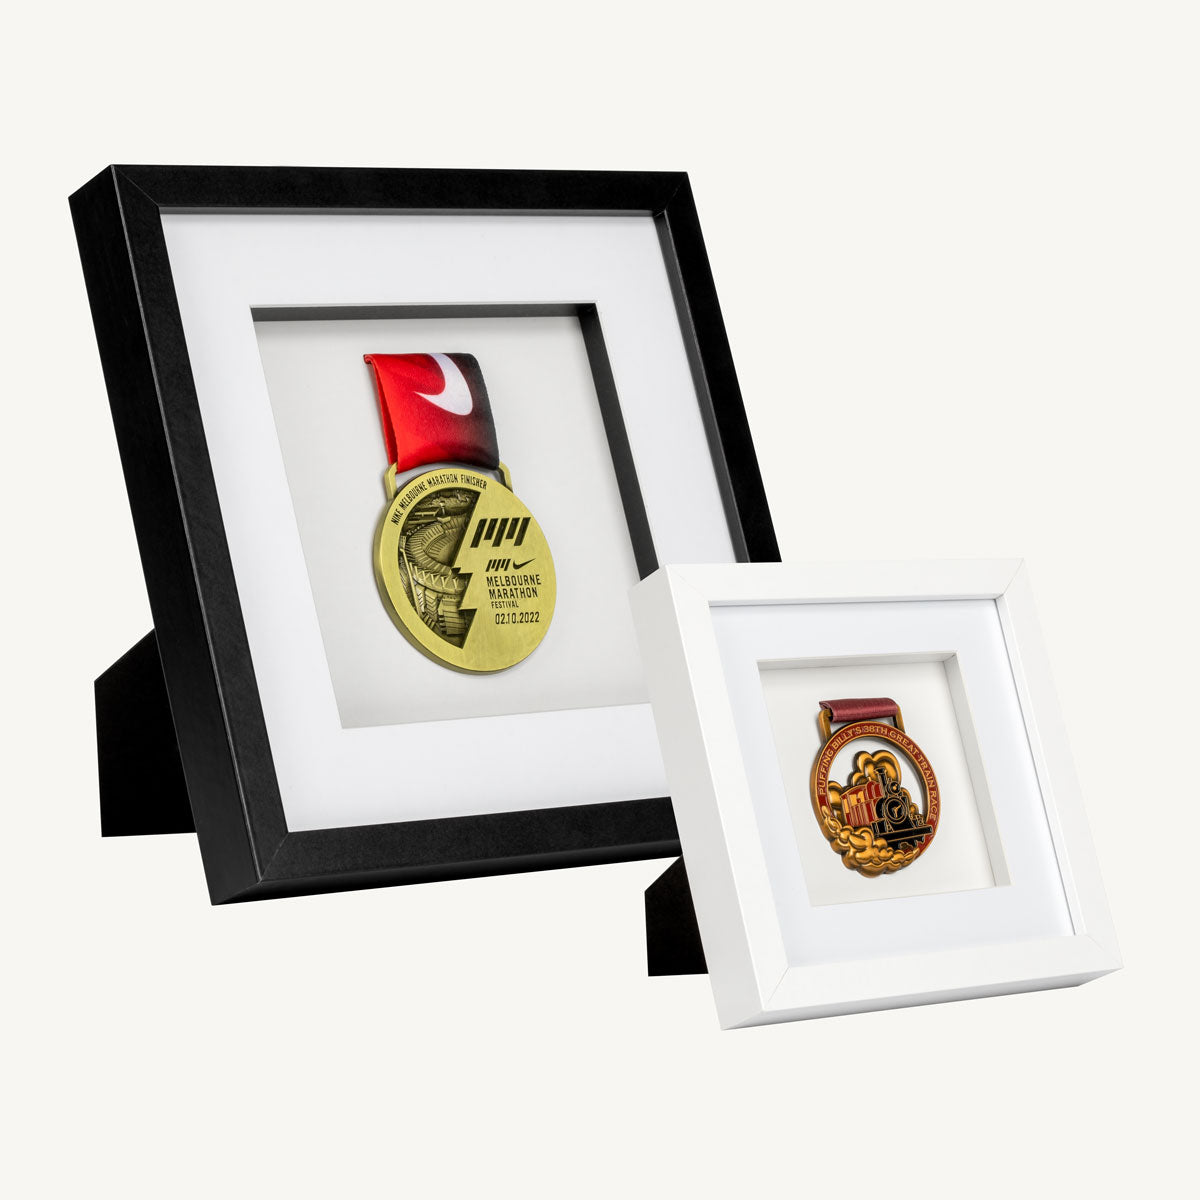 2 framed medals. ONe frame is bigger than the other and is black. The smaller frame is white.